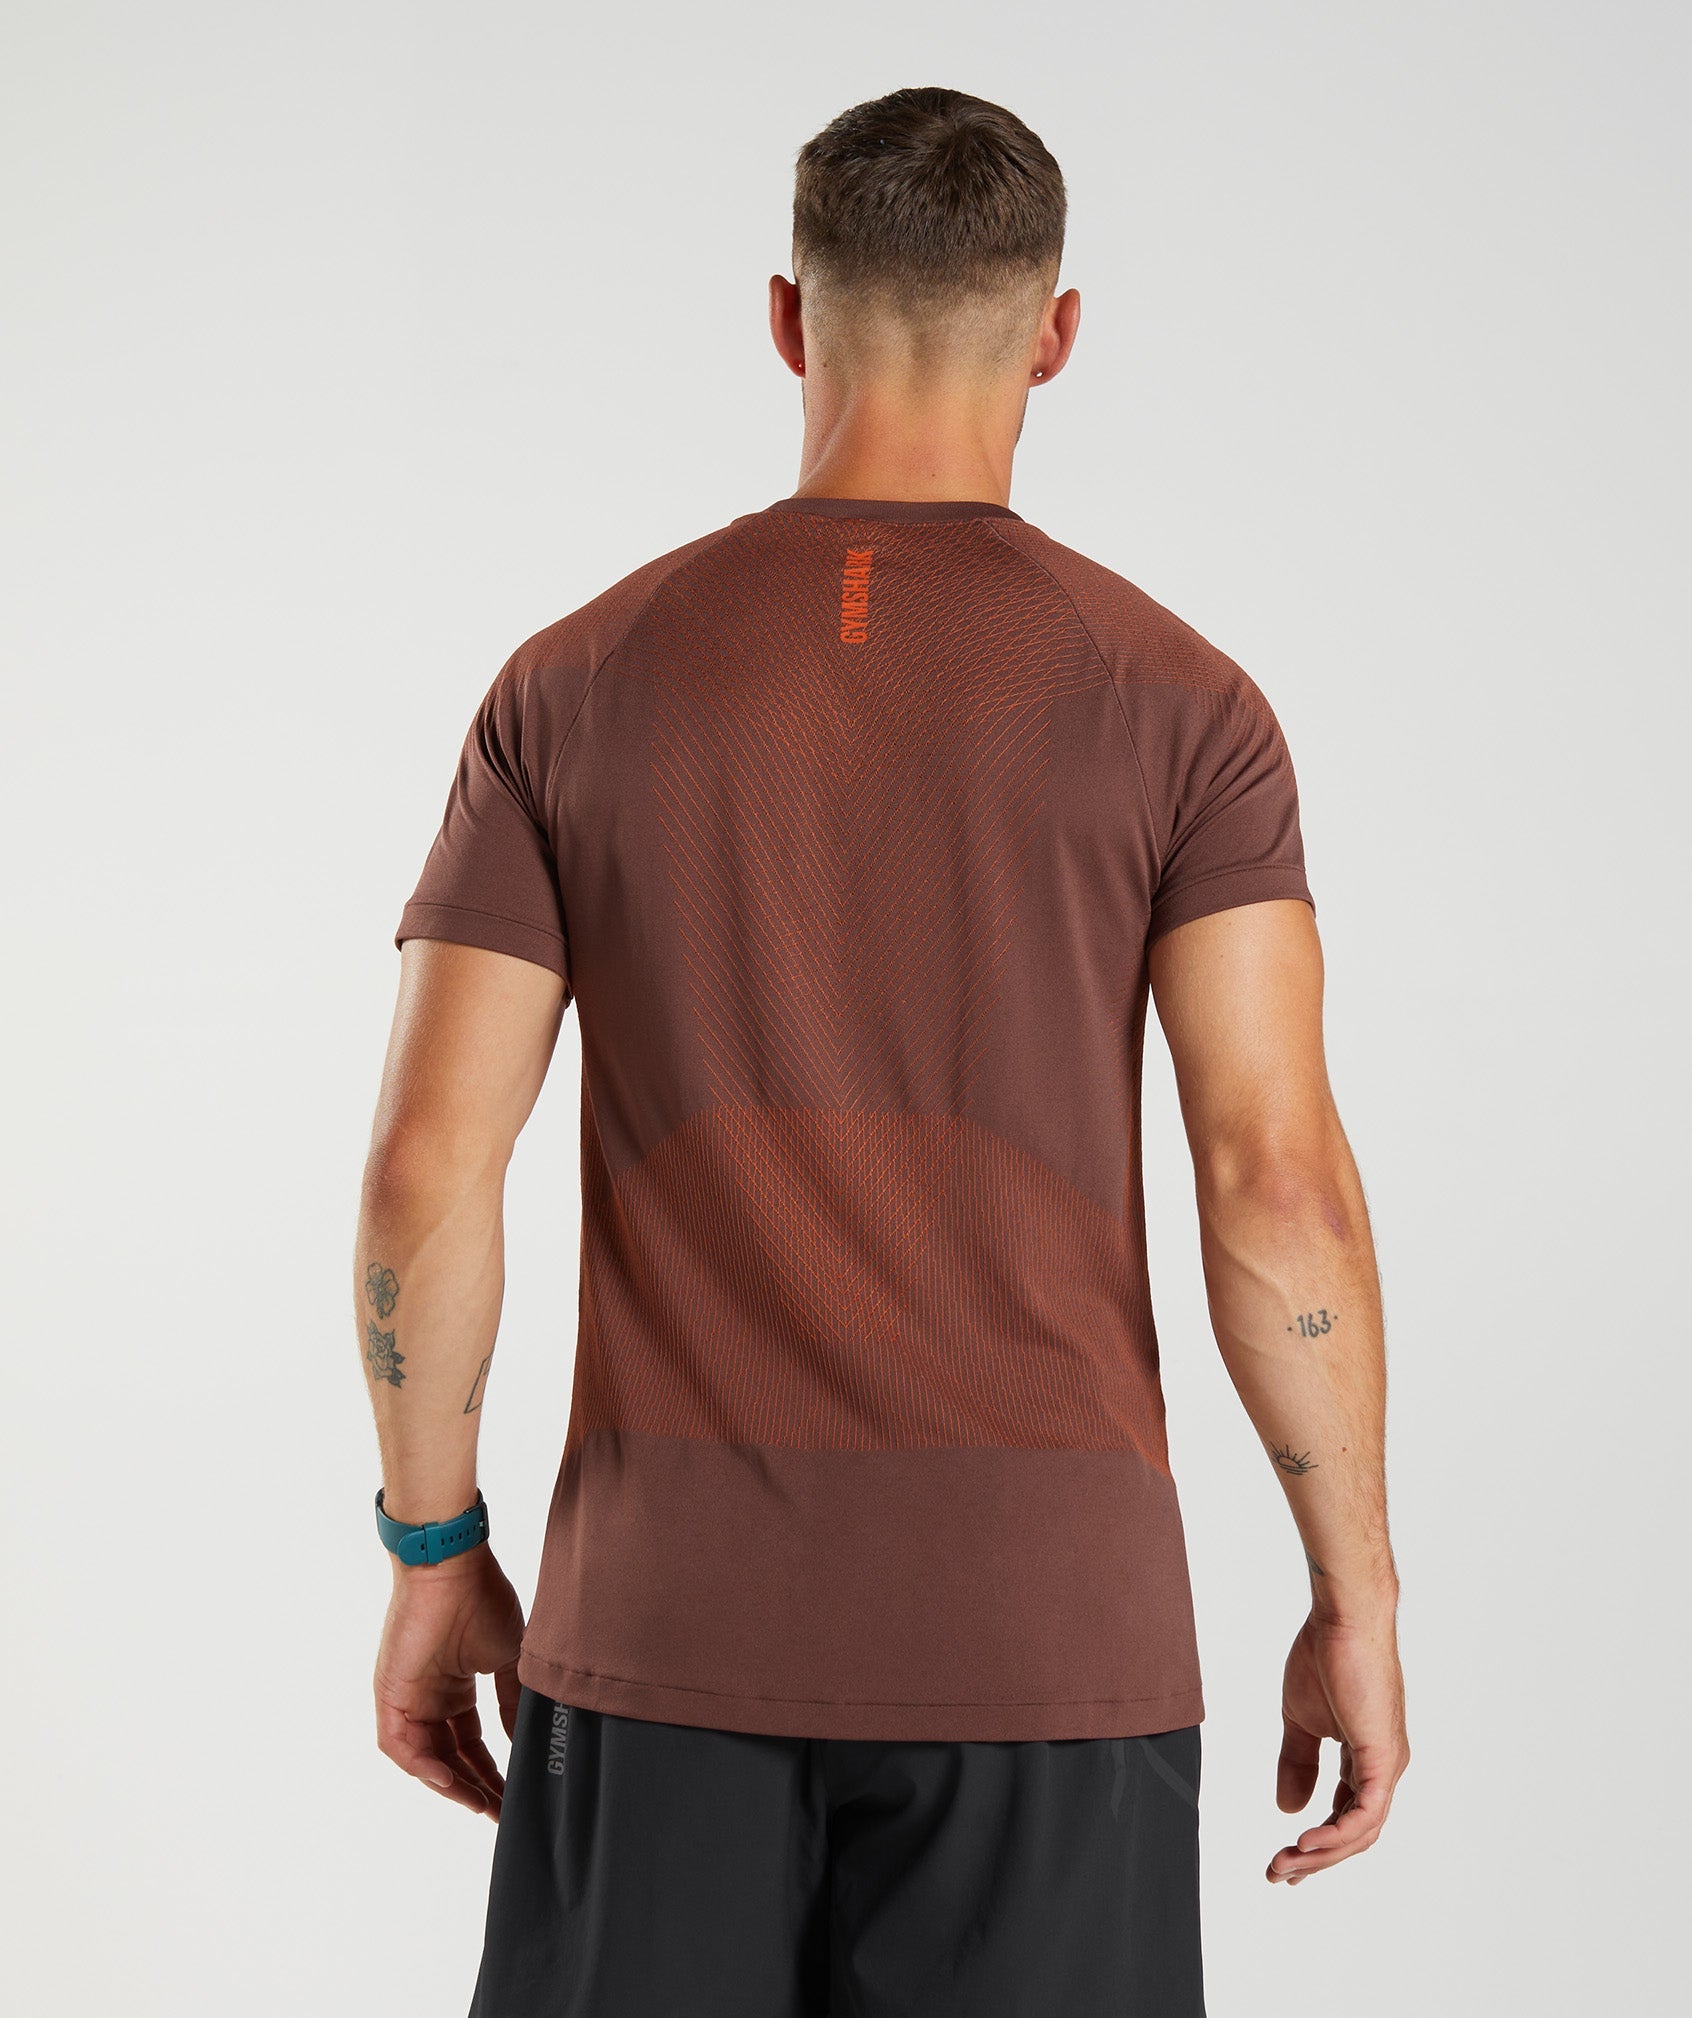 Apex Seamless T-Shirt in Cherry Brown/Pepper Red - view 2